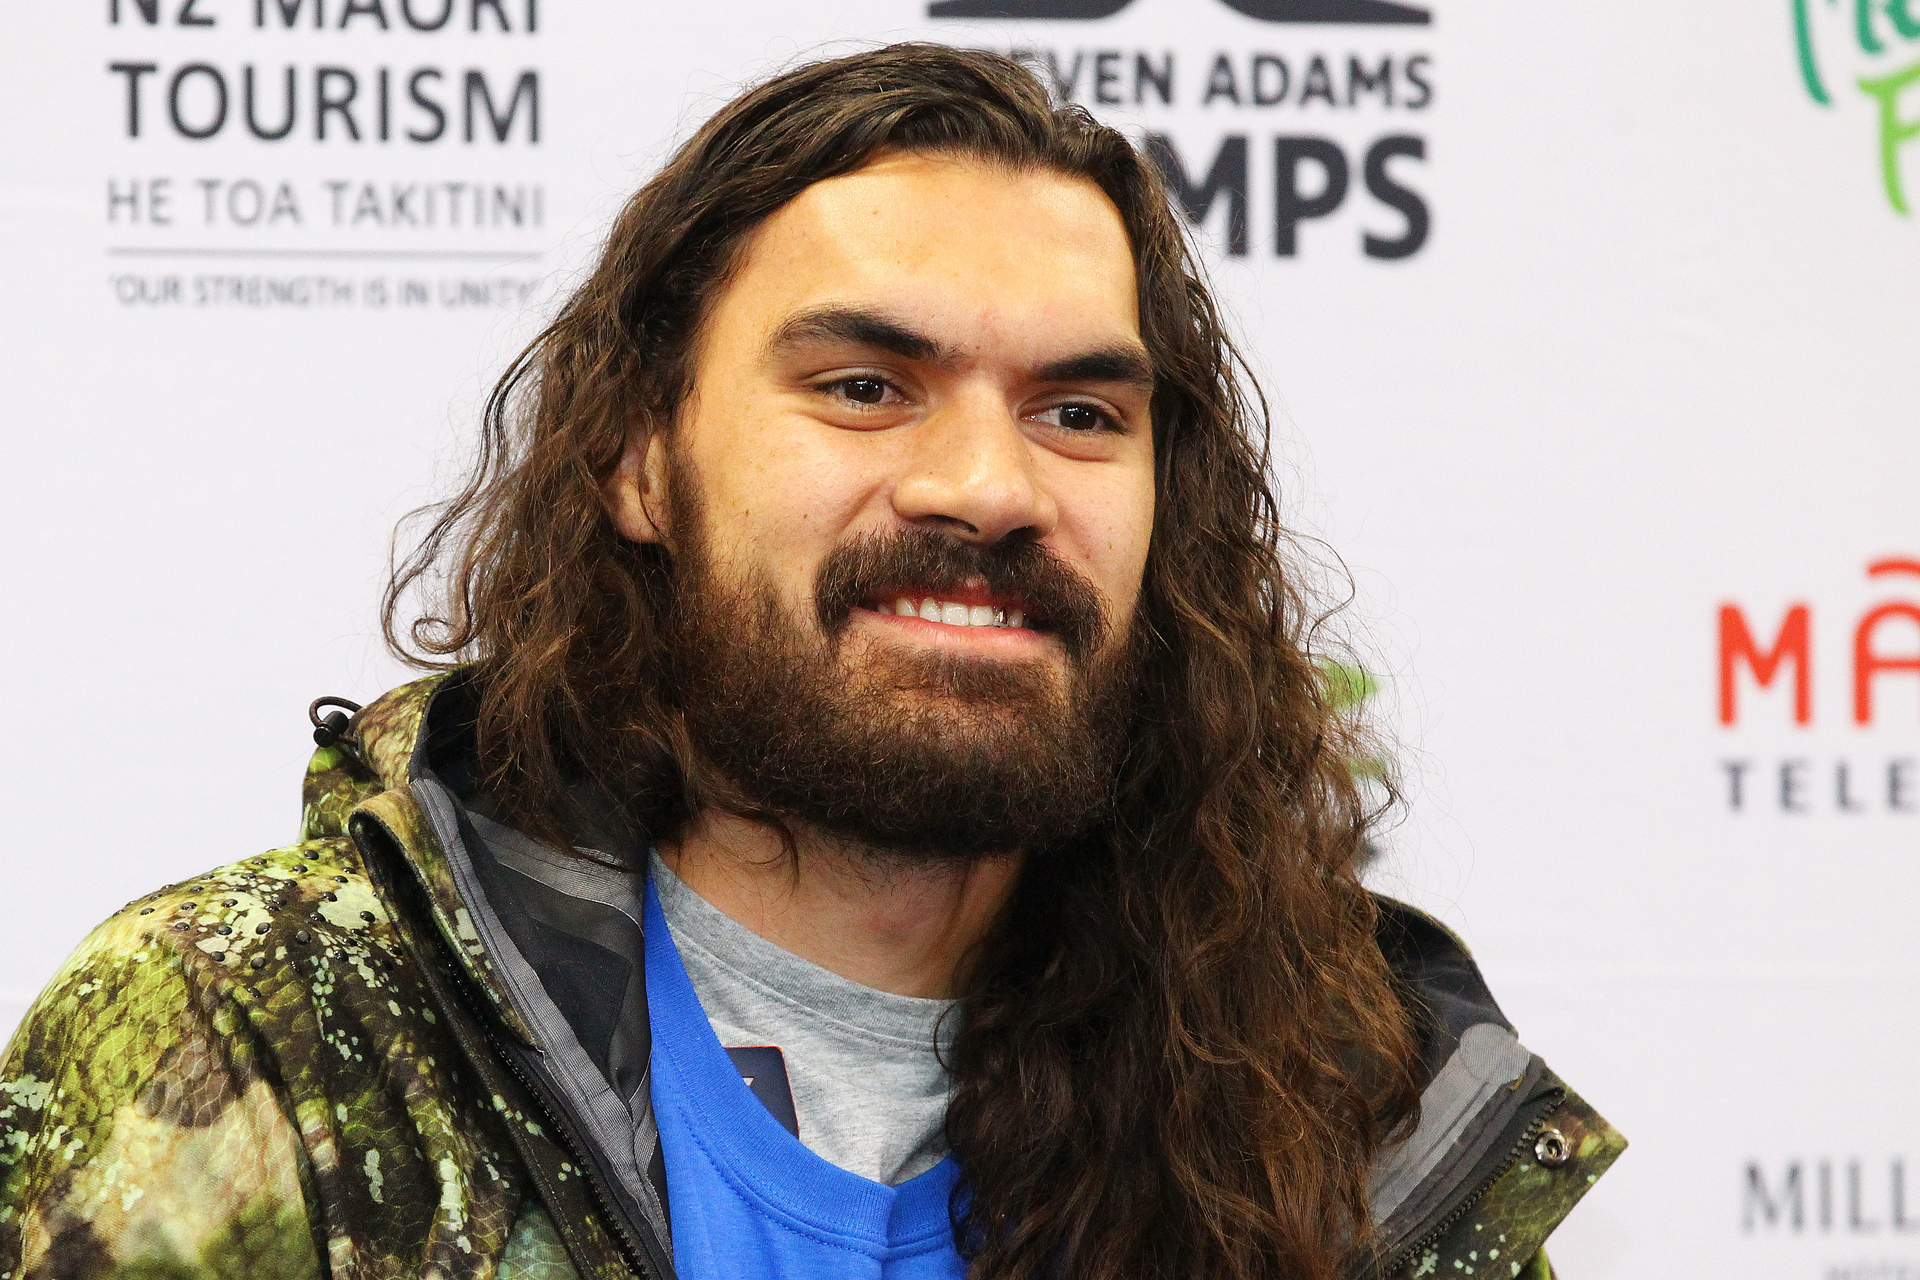 Basketball: Oklahoma City Thunder star Steven Adams opens up on spending  time on his farm in New Zealand and the NBA restart - NZ Herald